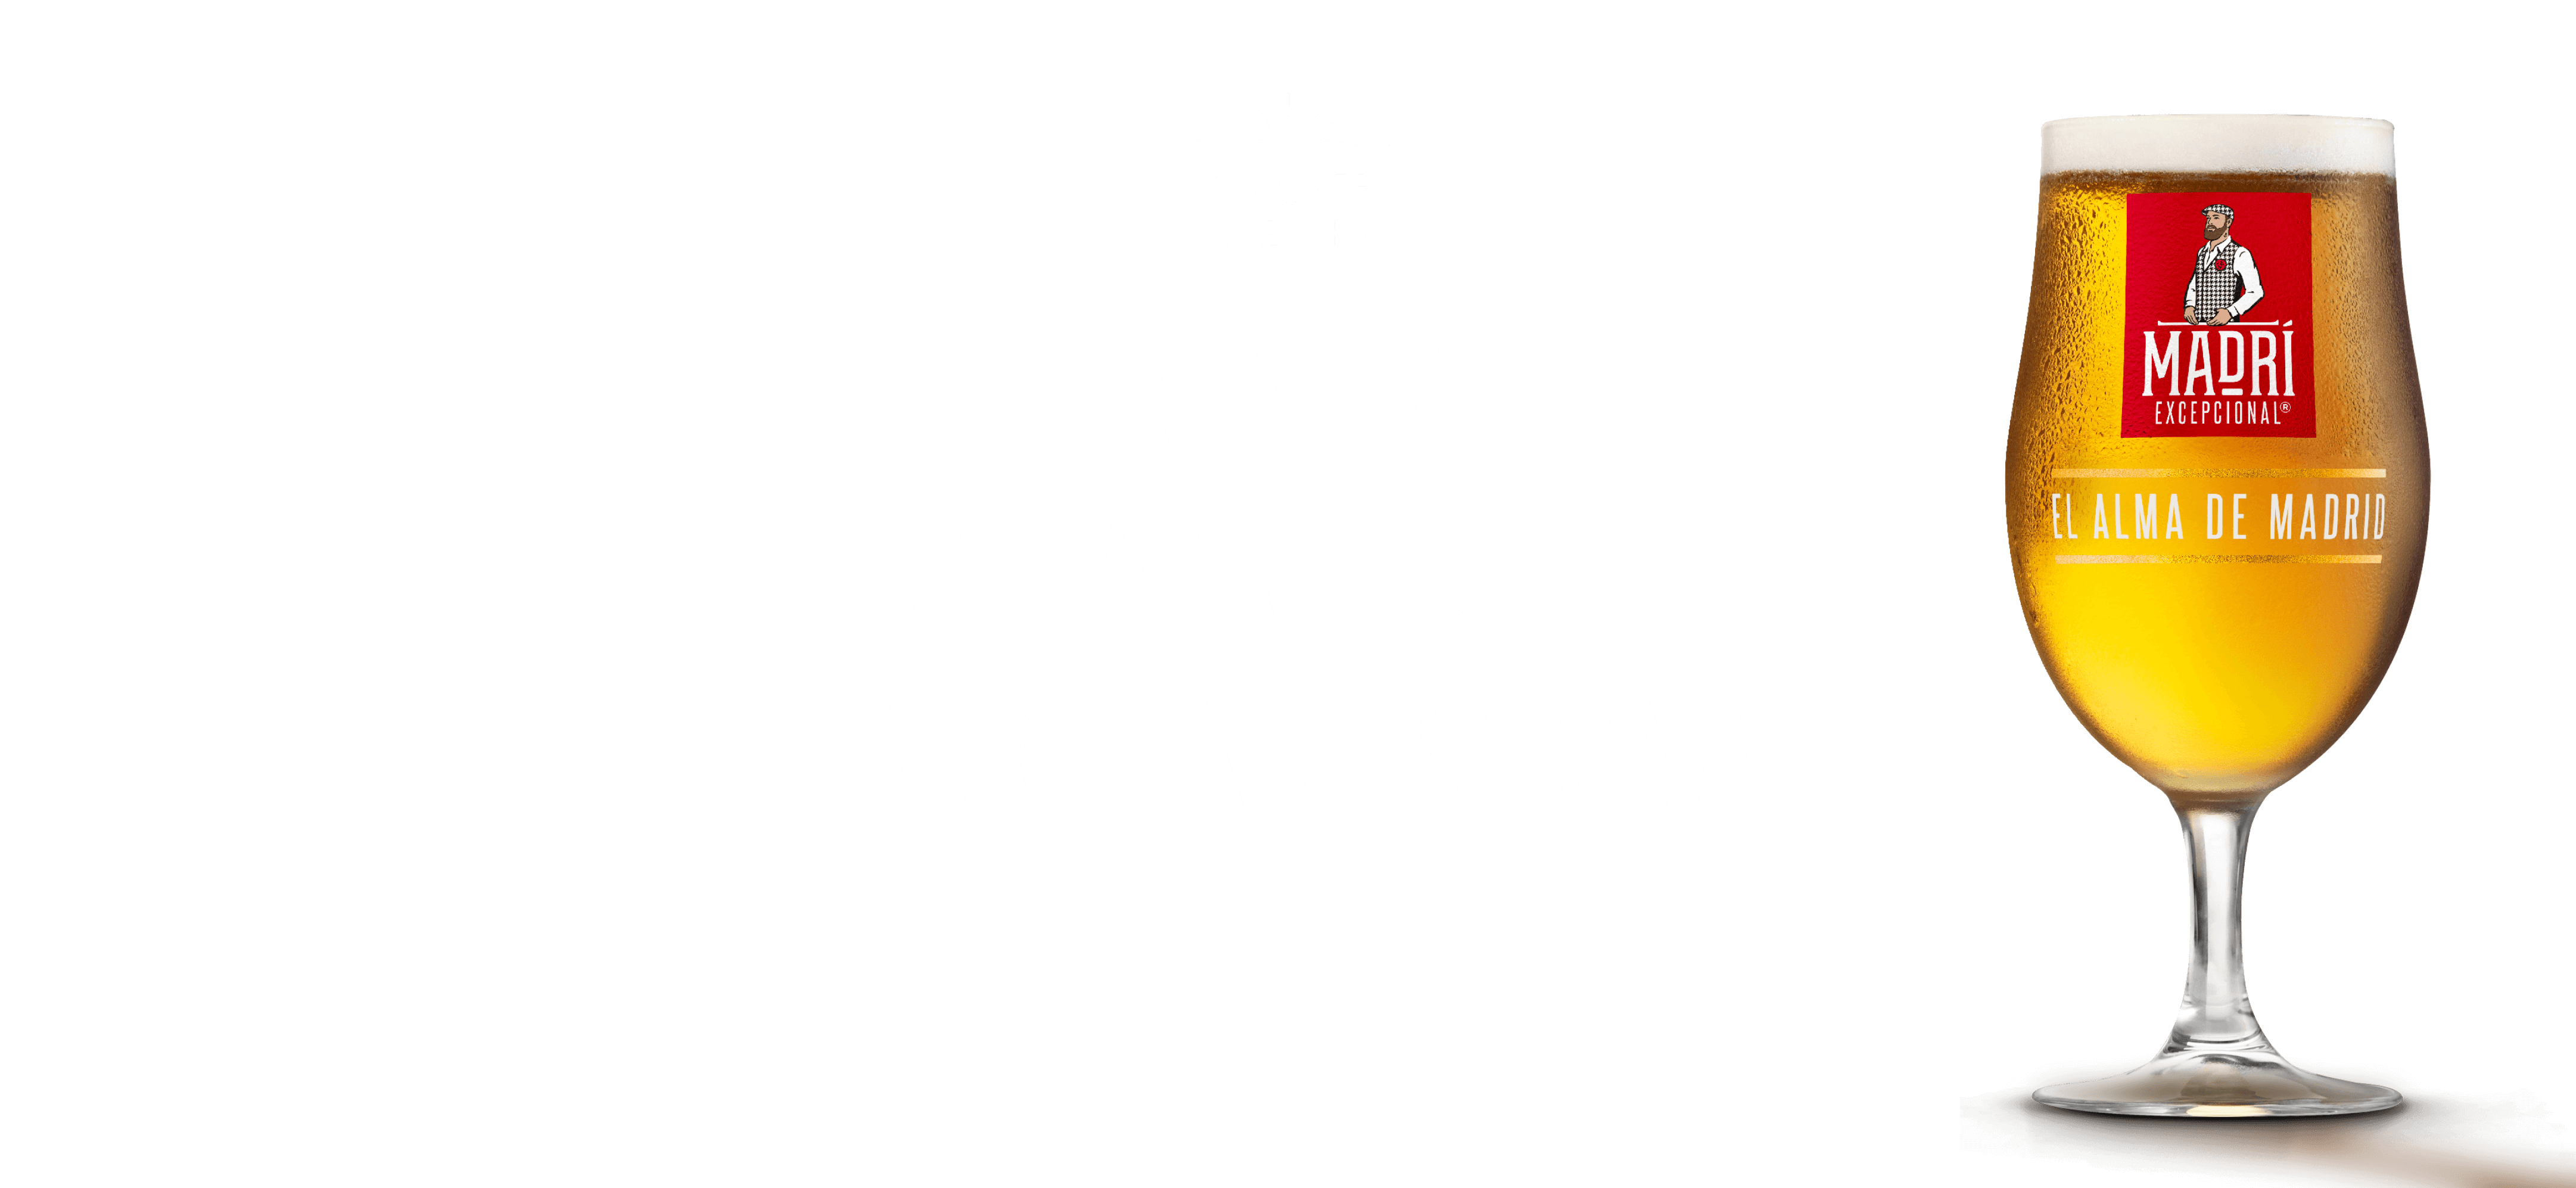 Win a trip to Madrid with Madrí Excepcional